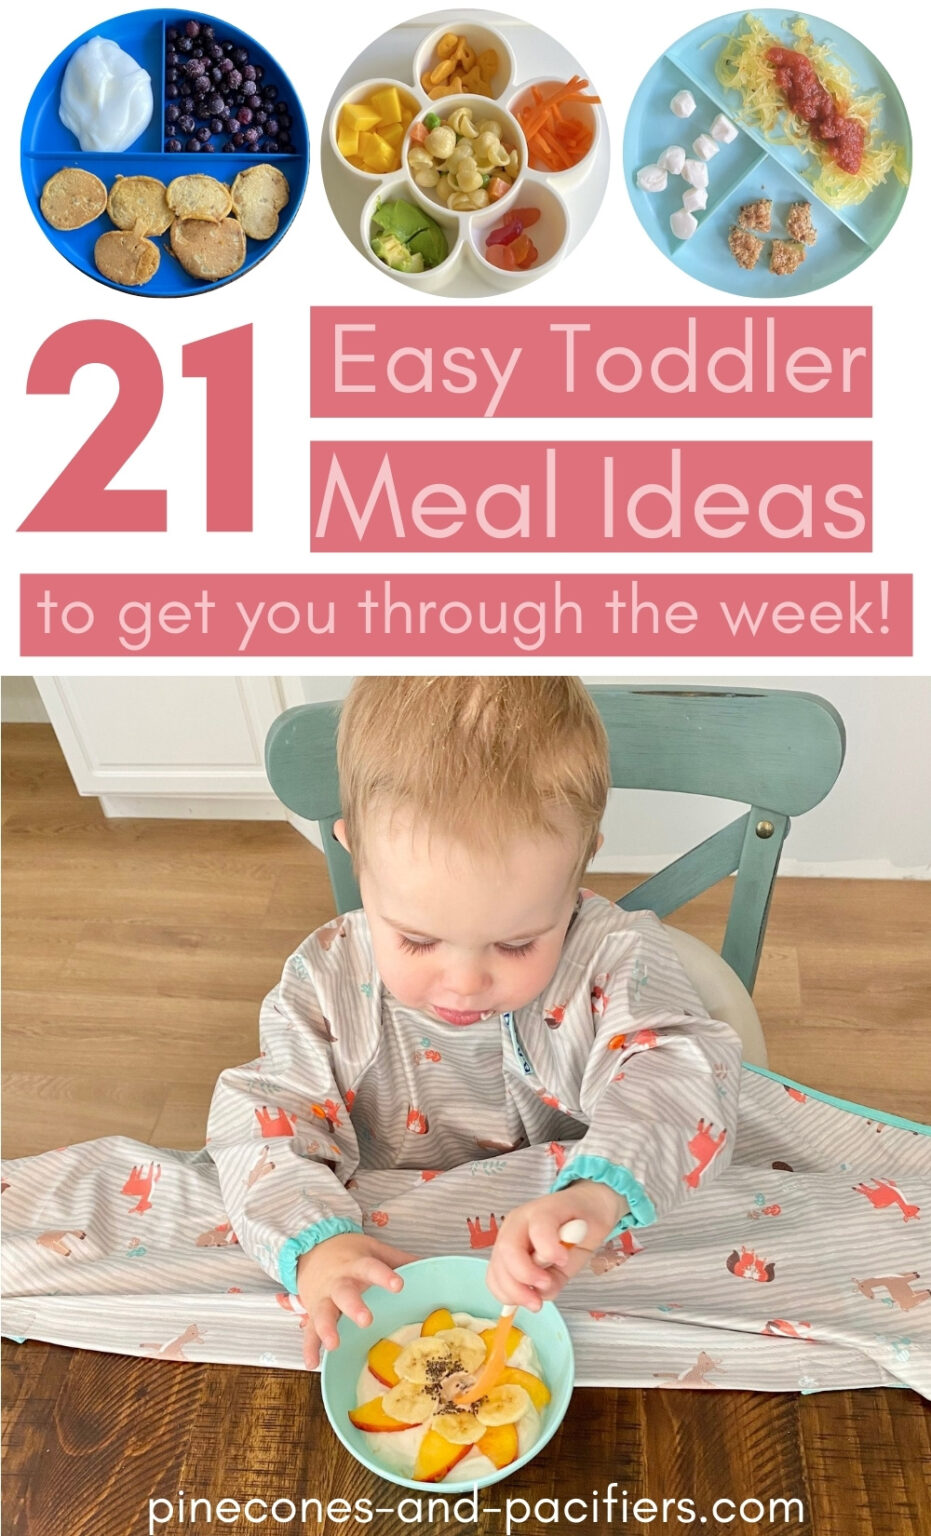 Easy Toddler Meal Ideas: 21 Meals for the Week - Pinecones & Pacifiers